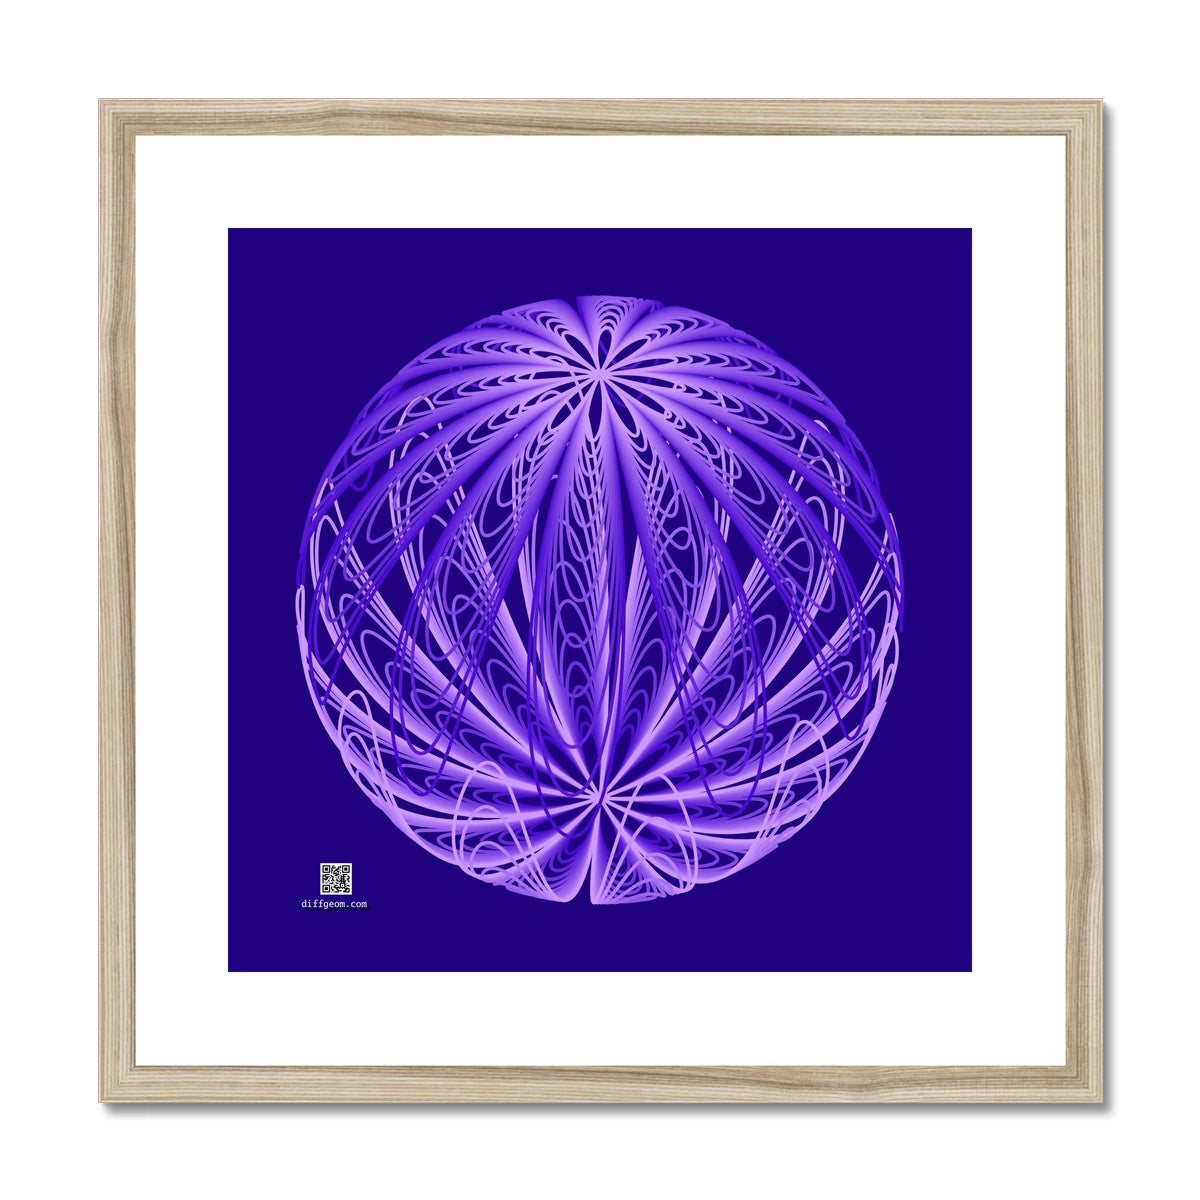 Dipole, Xray Sphere Framed & Mounted Print